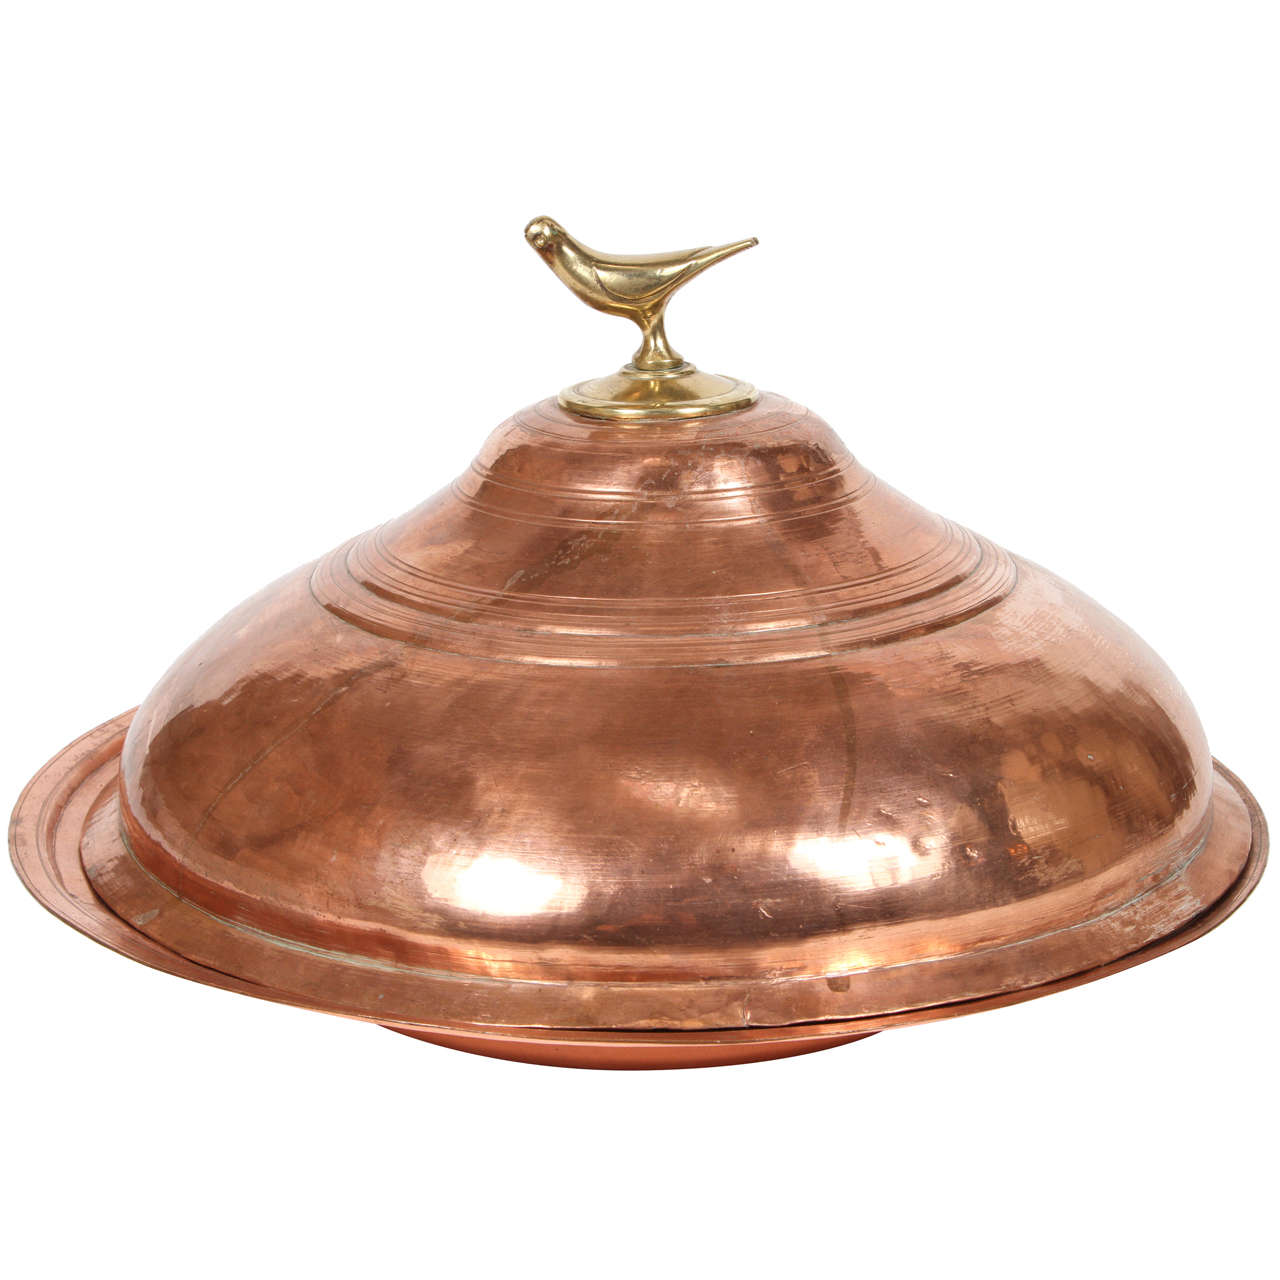 Large Moroccan Round Copper Tajine Serving Dish with Cover